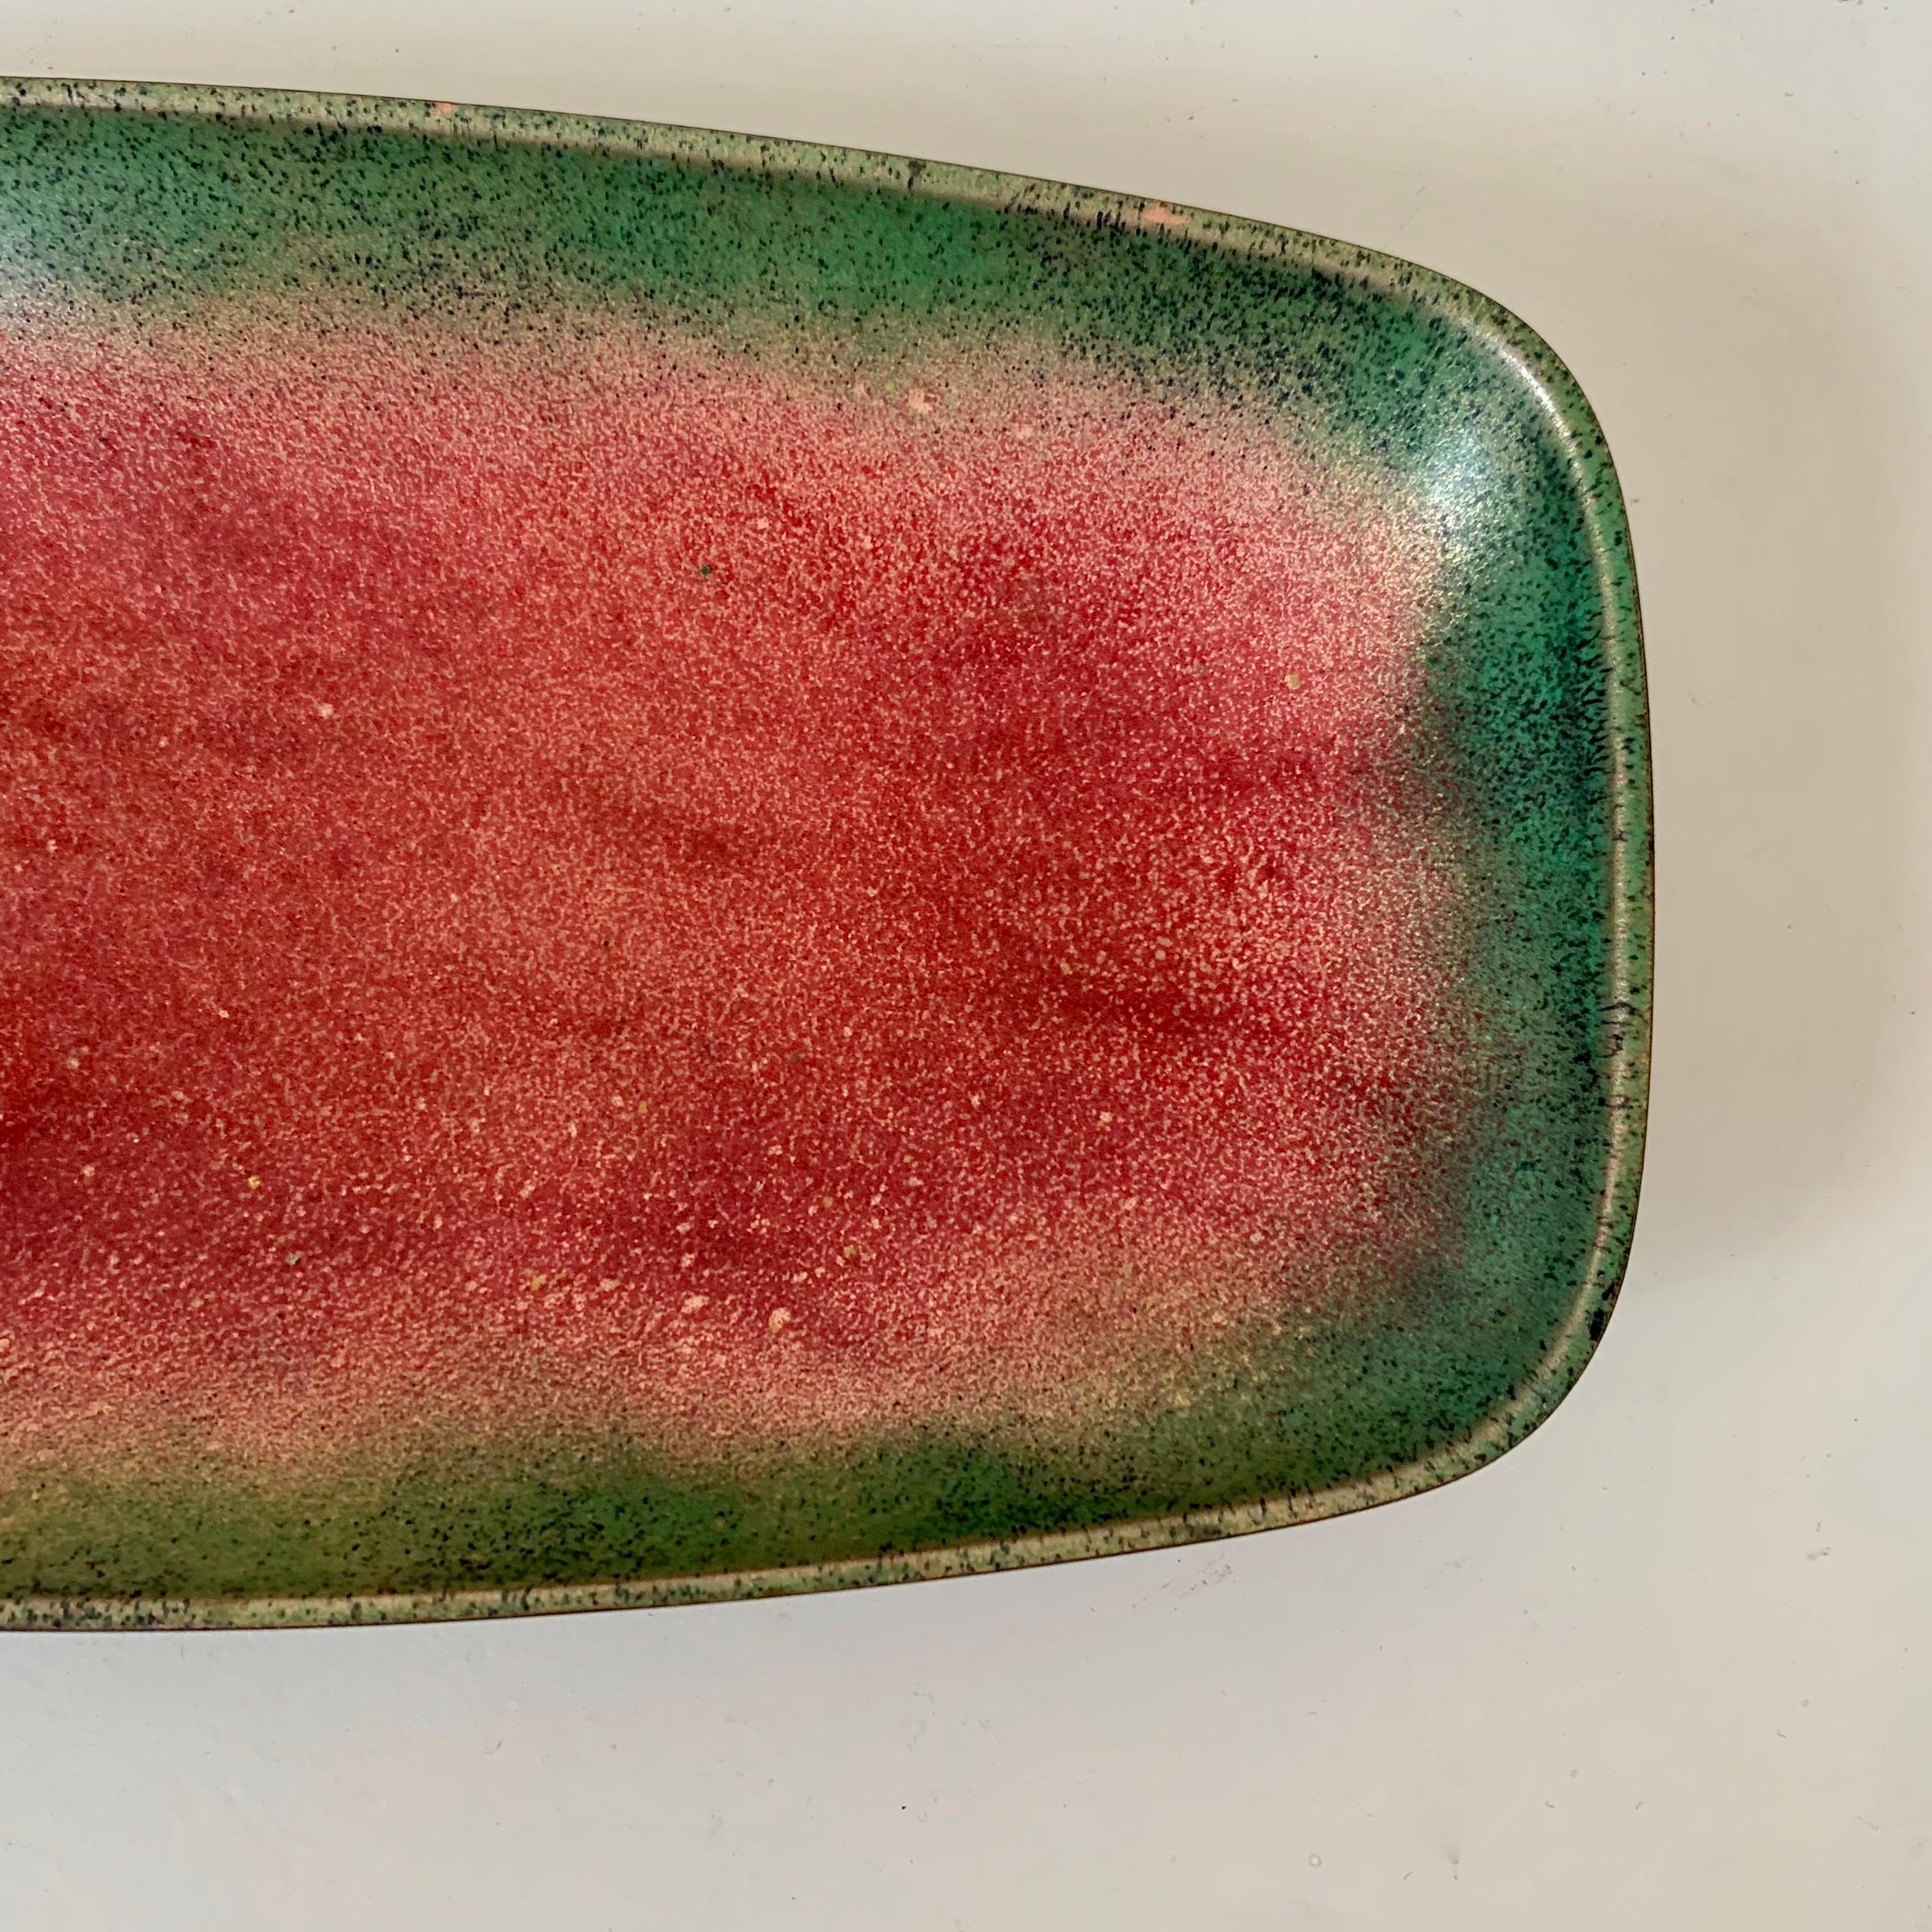 Mid-20th Century Paolo De Poli Attributed Large Enameled Copper Platter, Italy circa 1950. For Sale